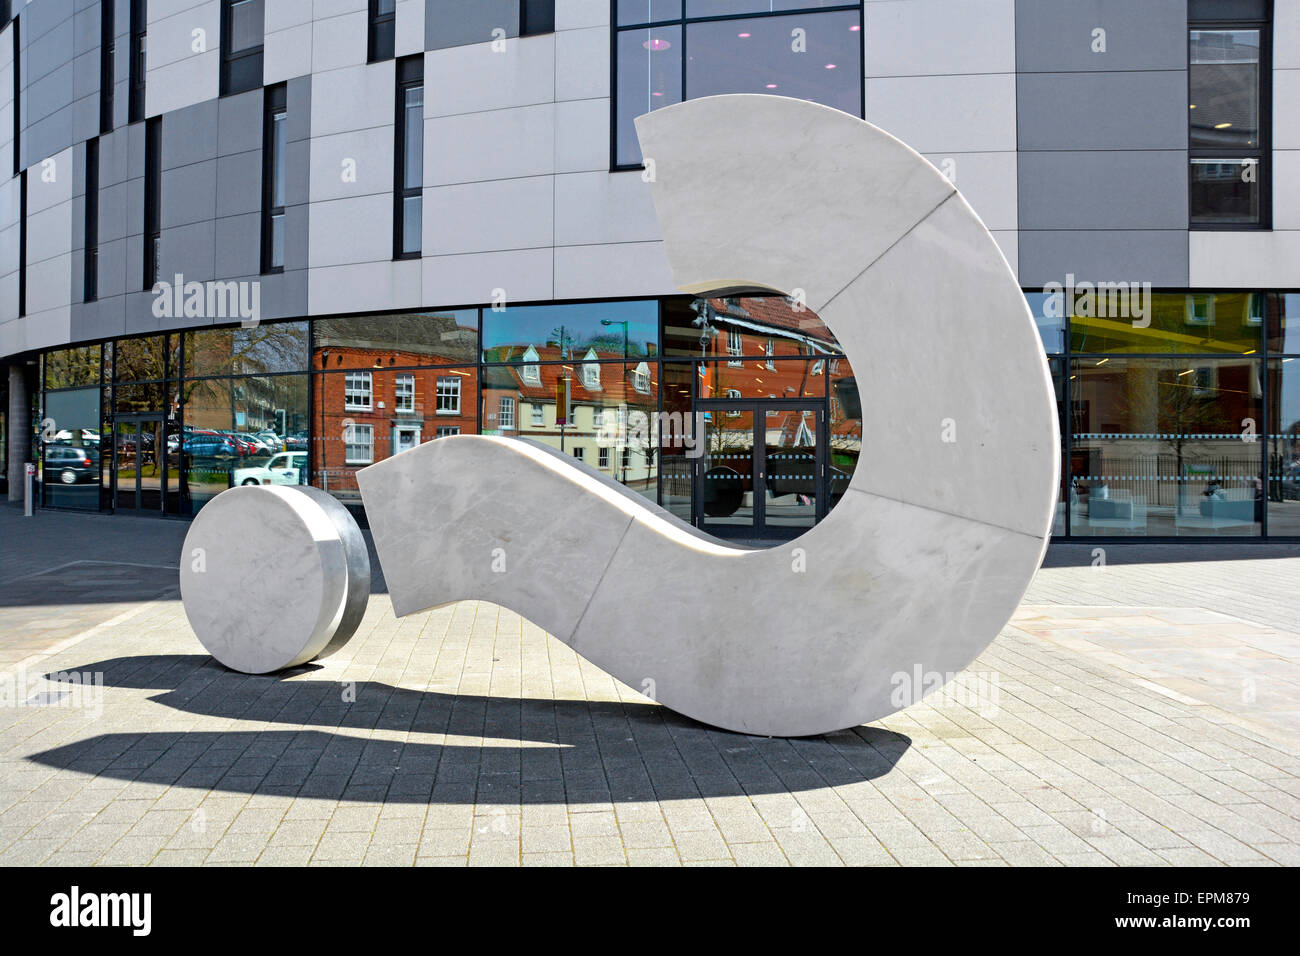 Close up of Question Mark sculpture by Langlands & Bell outside University Campus Ipswich Suffolk Waterfront Building England UK Stock Photo